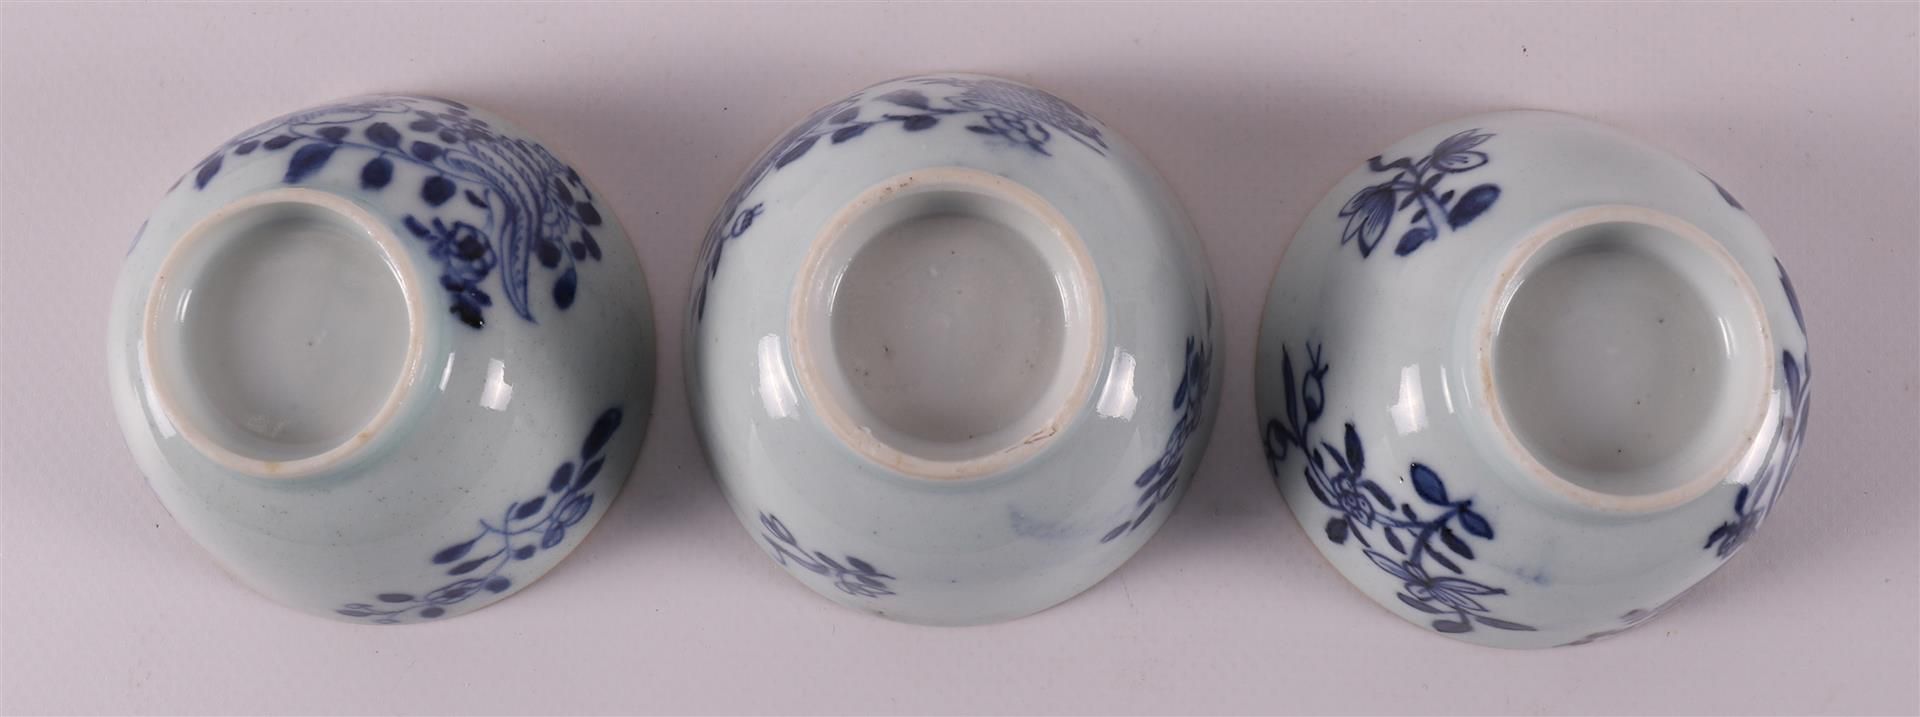 Six blue/white porcelain cups and saucers, China, Qianlong, 18th century. - Image 15 of 20